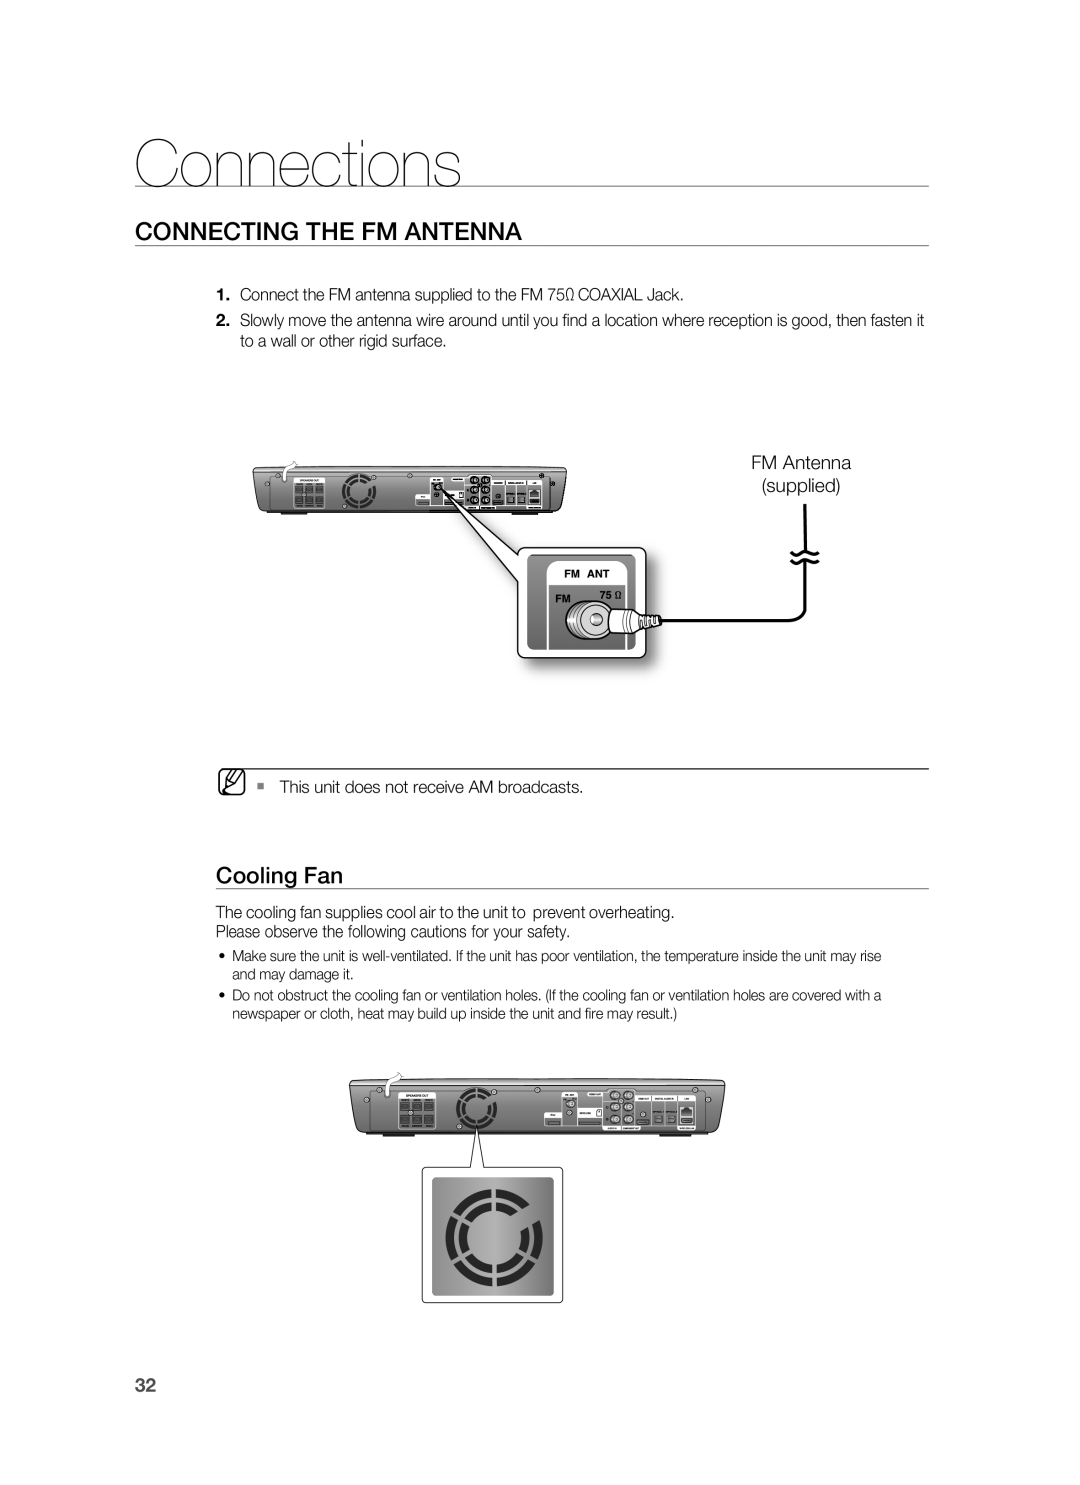 Samsung AH68-02178Z, HT-BD1200 user manual Connecting The Fm Antenna, Cooling Fan, Connections 